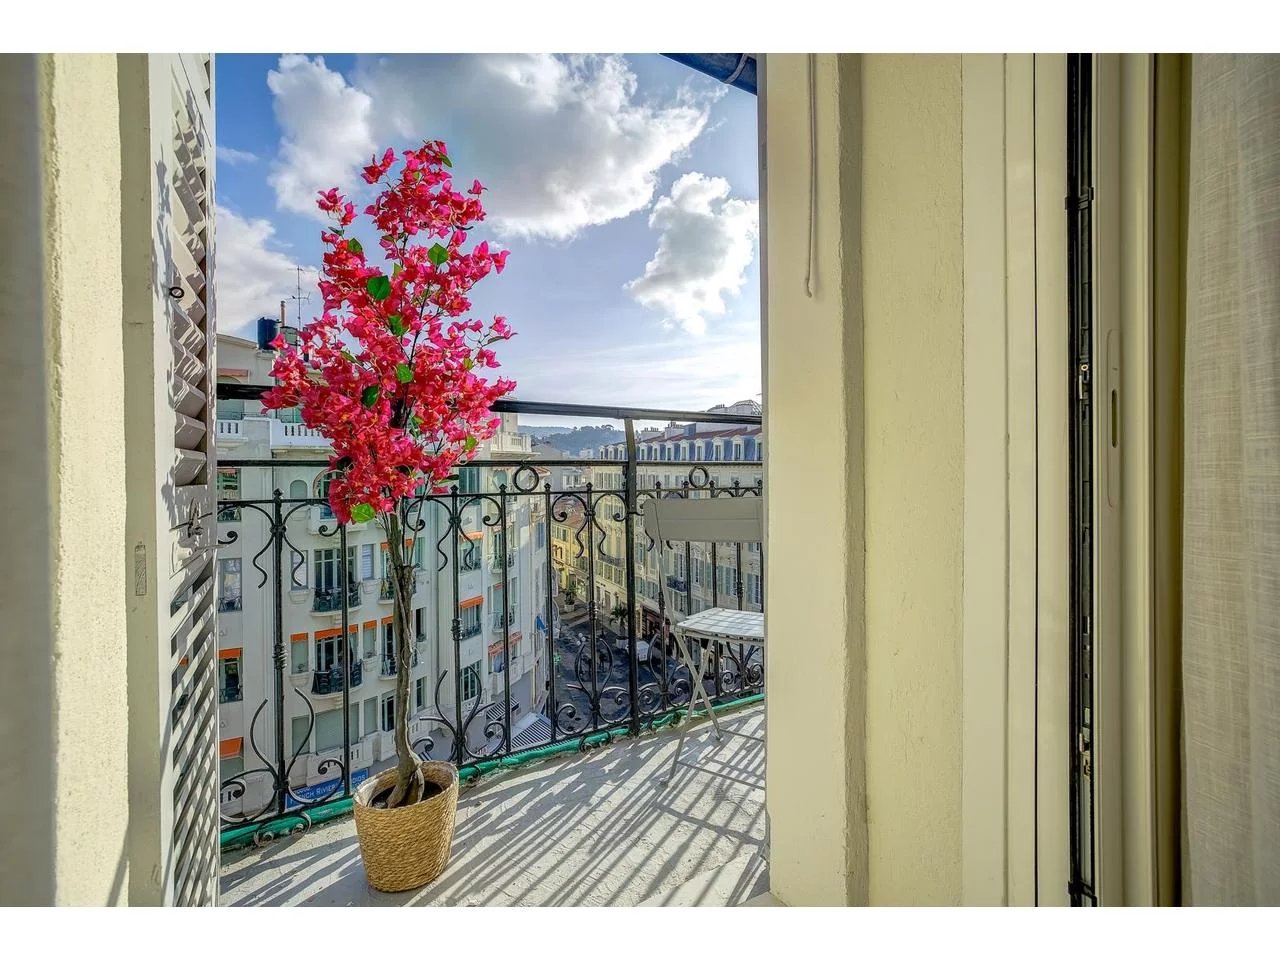 Appartement  4 Rooms 92.44m2  for sale  1 350 000 €